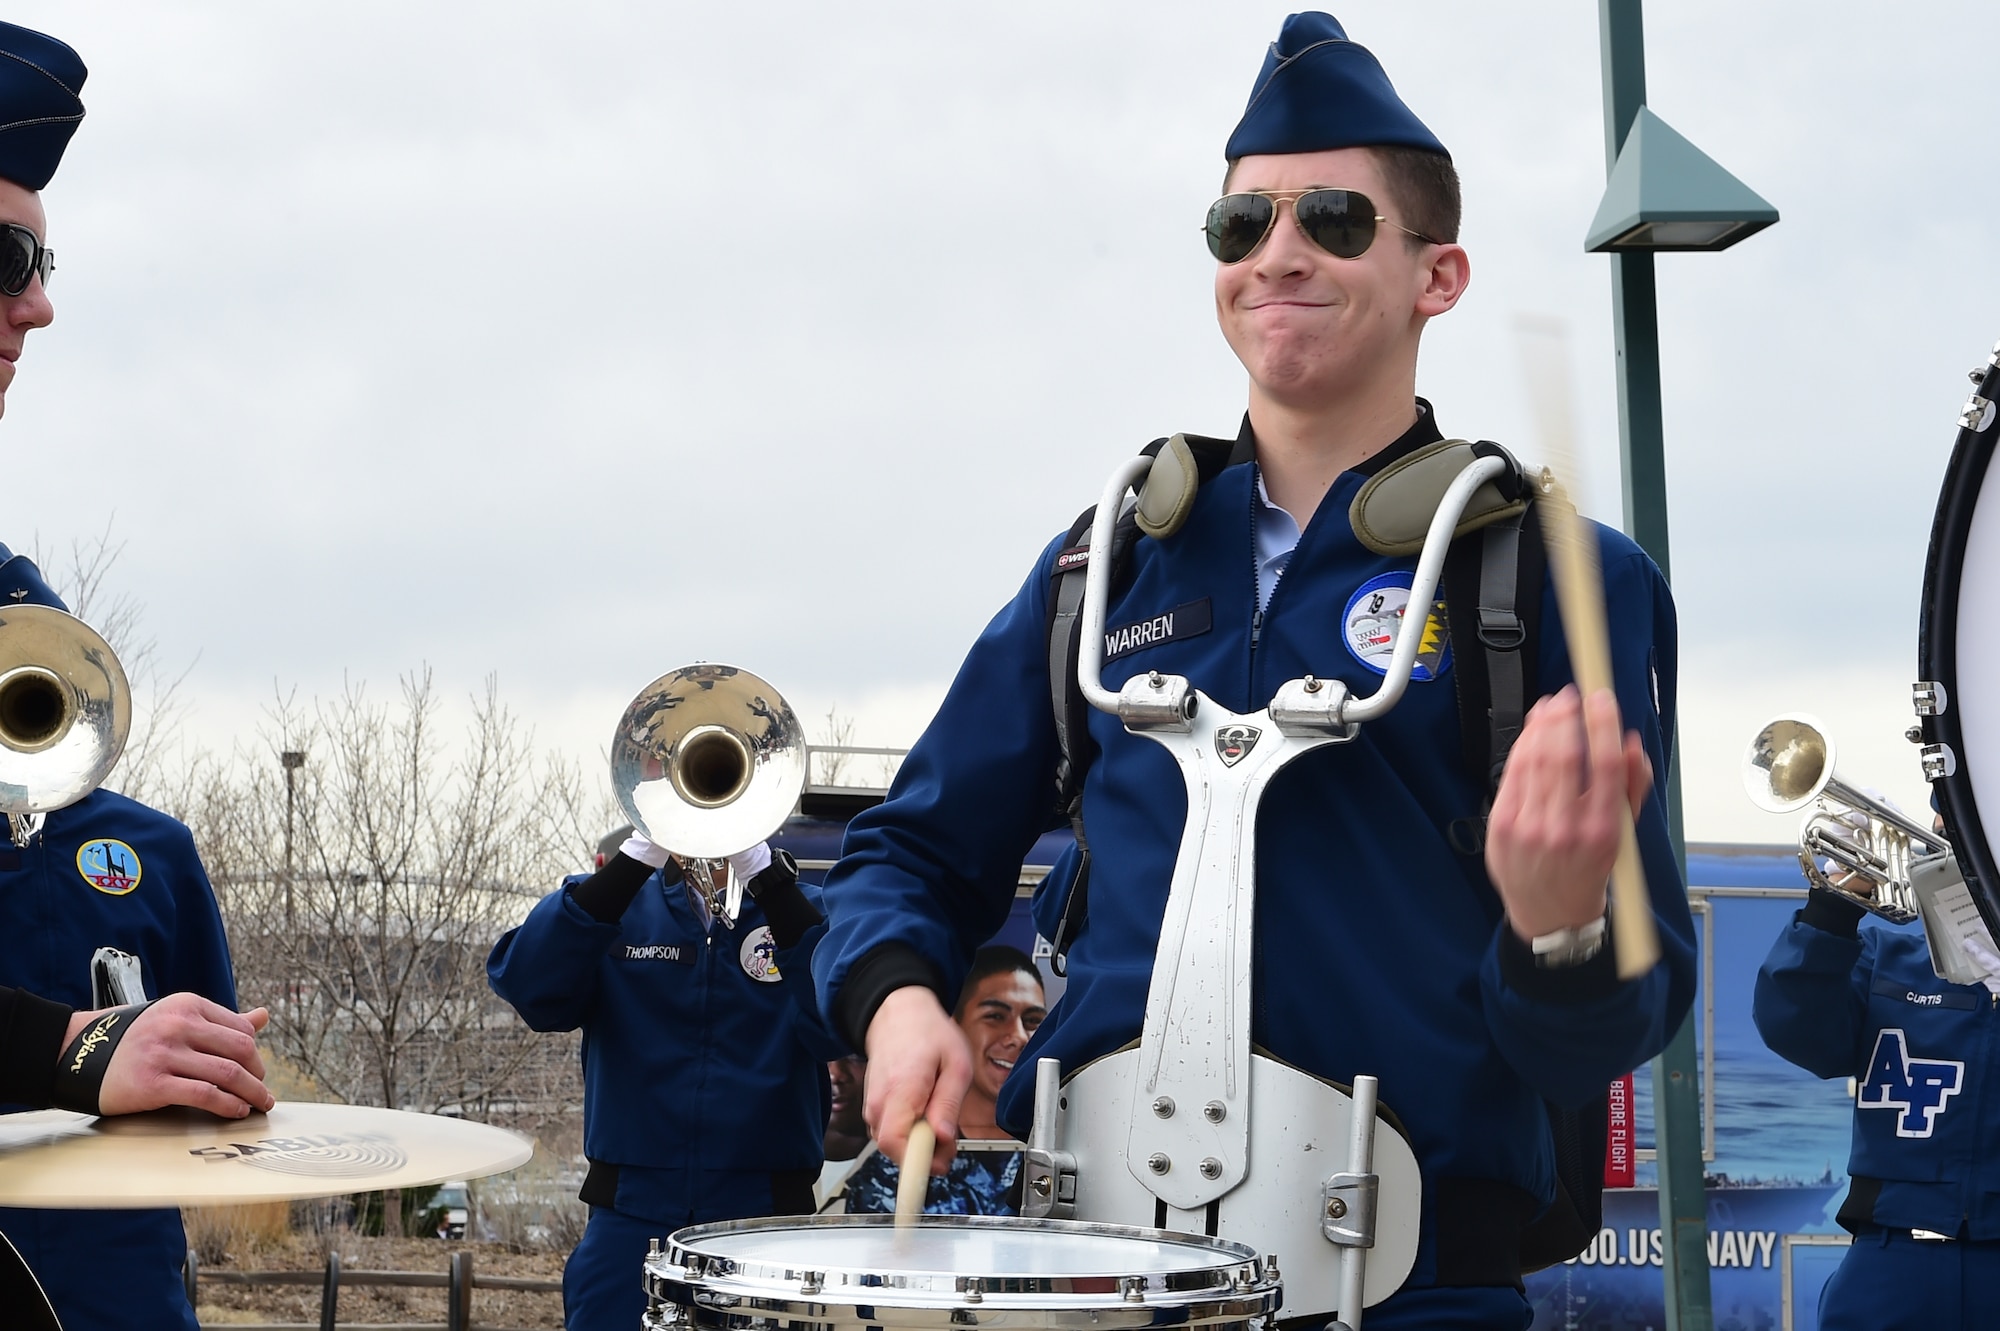 Air Force Academy band members perform before the Colorado Avalanche game March 5, 2016, at the Pepsi Center in Denver, Colo. The academy was invited to perform for the fifth annual “Military Appreciation Day” held by the Avalanche, which honors United States military members. (U.S. Air Force photo by Airman 1st Class Luke W. Nowakowski/Released)